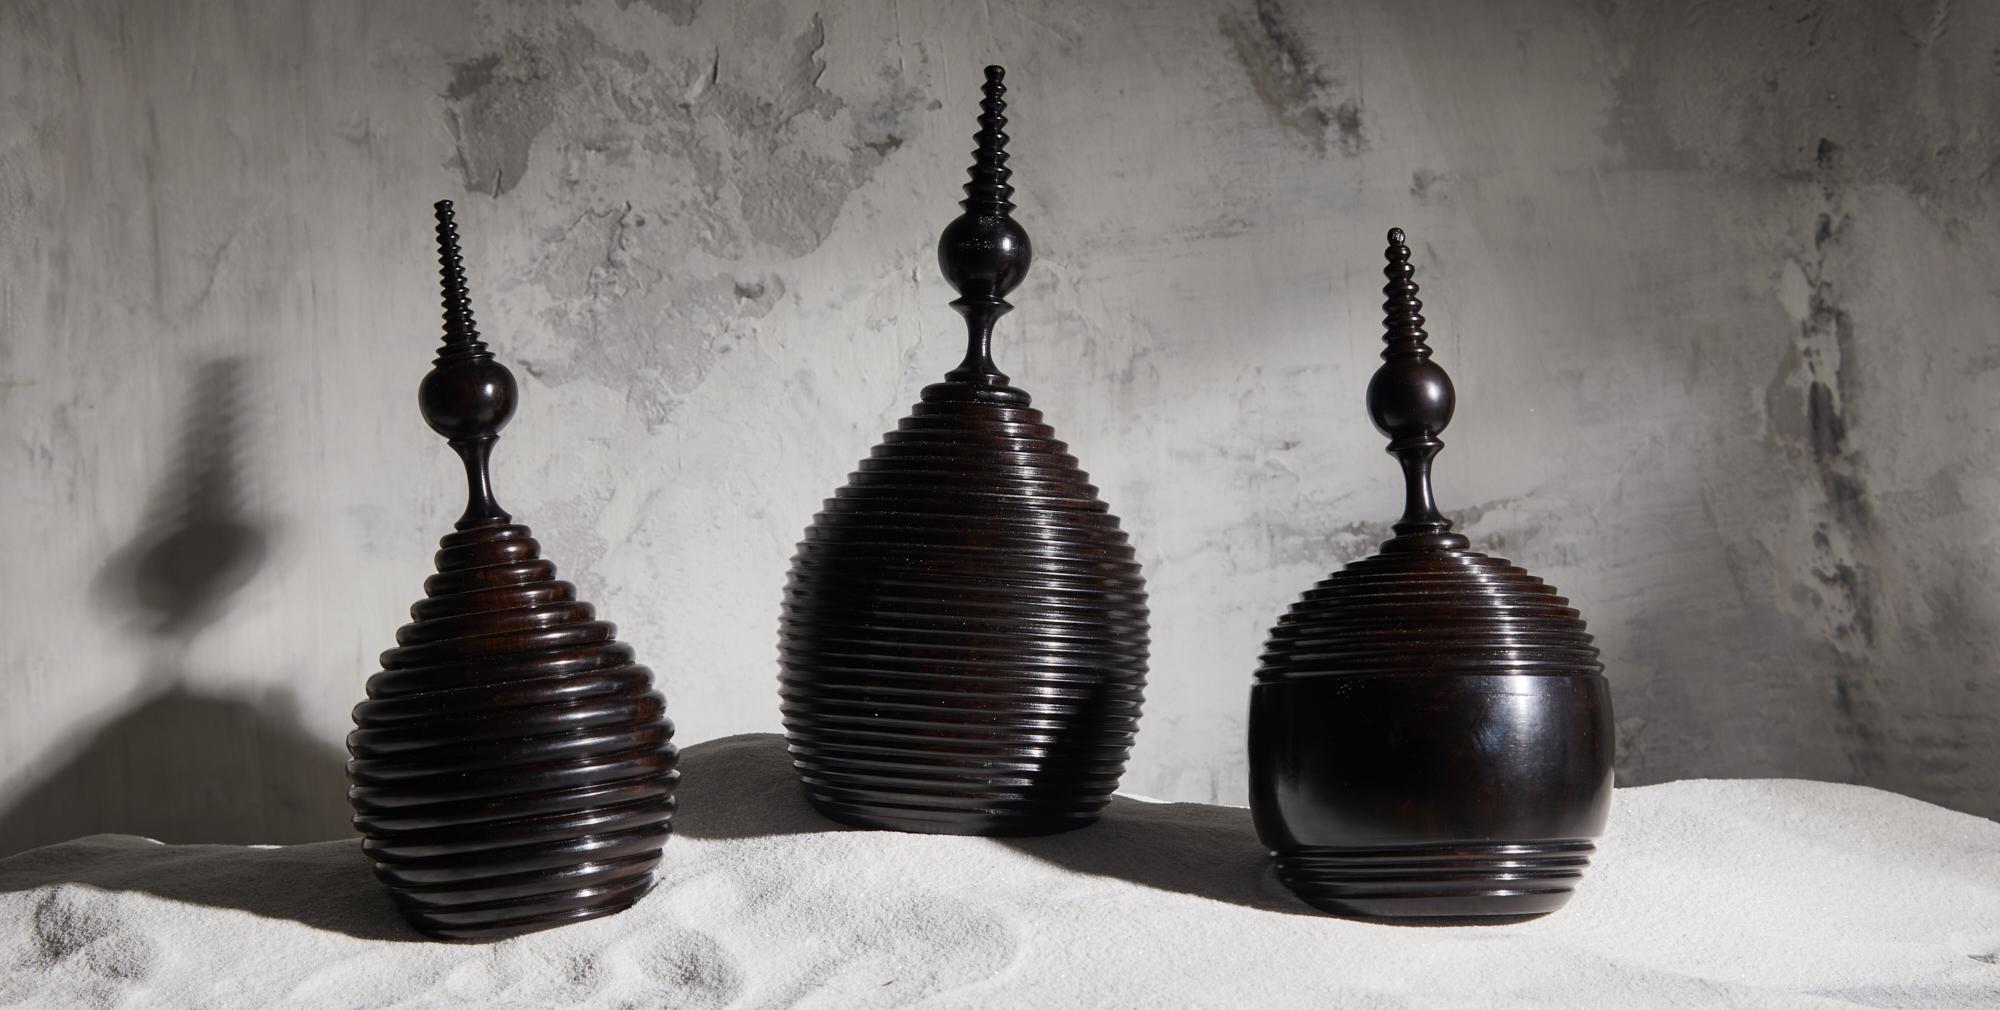 Curving lines and timeless elegance.

Essentially dark and dense, sustainably sourced, this object is the perfect marriage of extravagance and l’art du savoir-faire.

The precious ebony wood is prized for its density, fine grain, and melodious